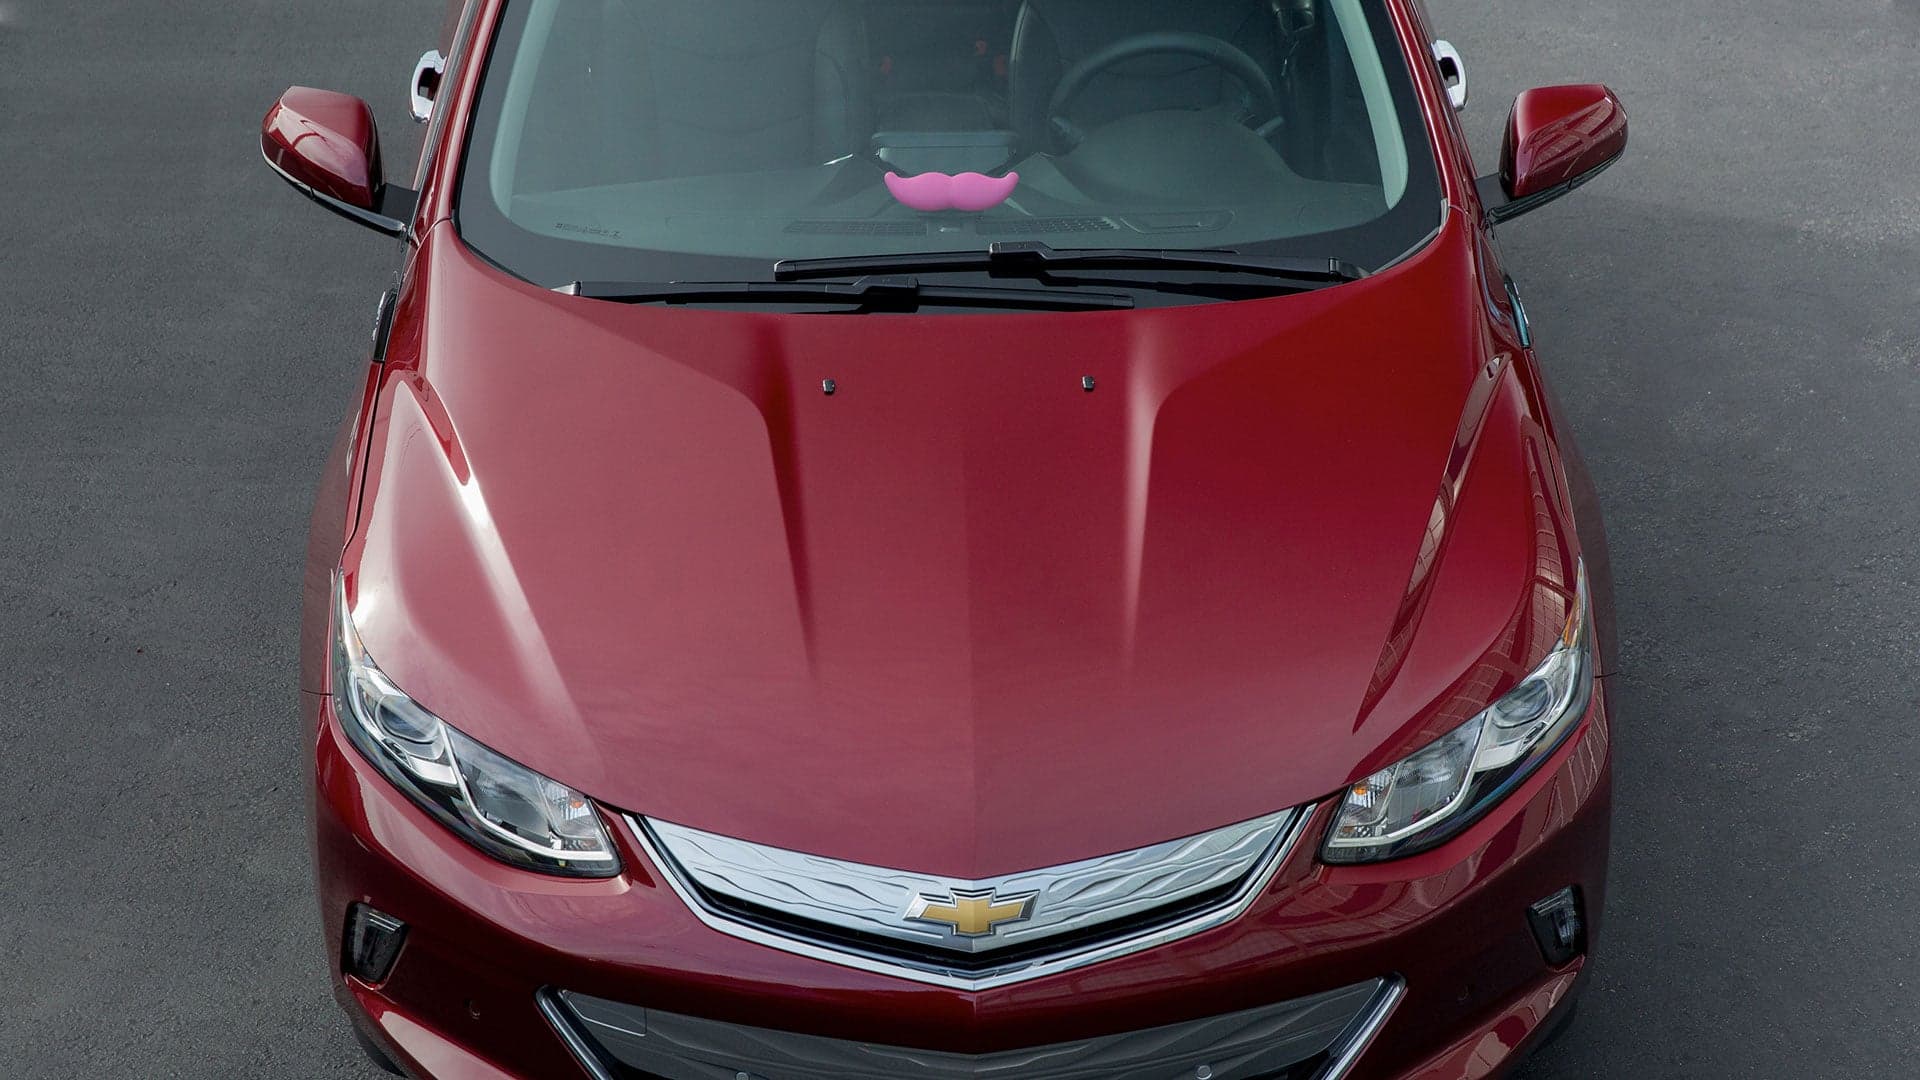 GM and Lyft’s Ride-Share Network Will Be Self-Driving